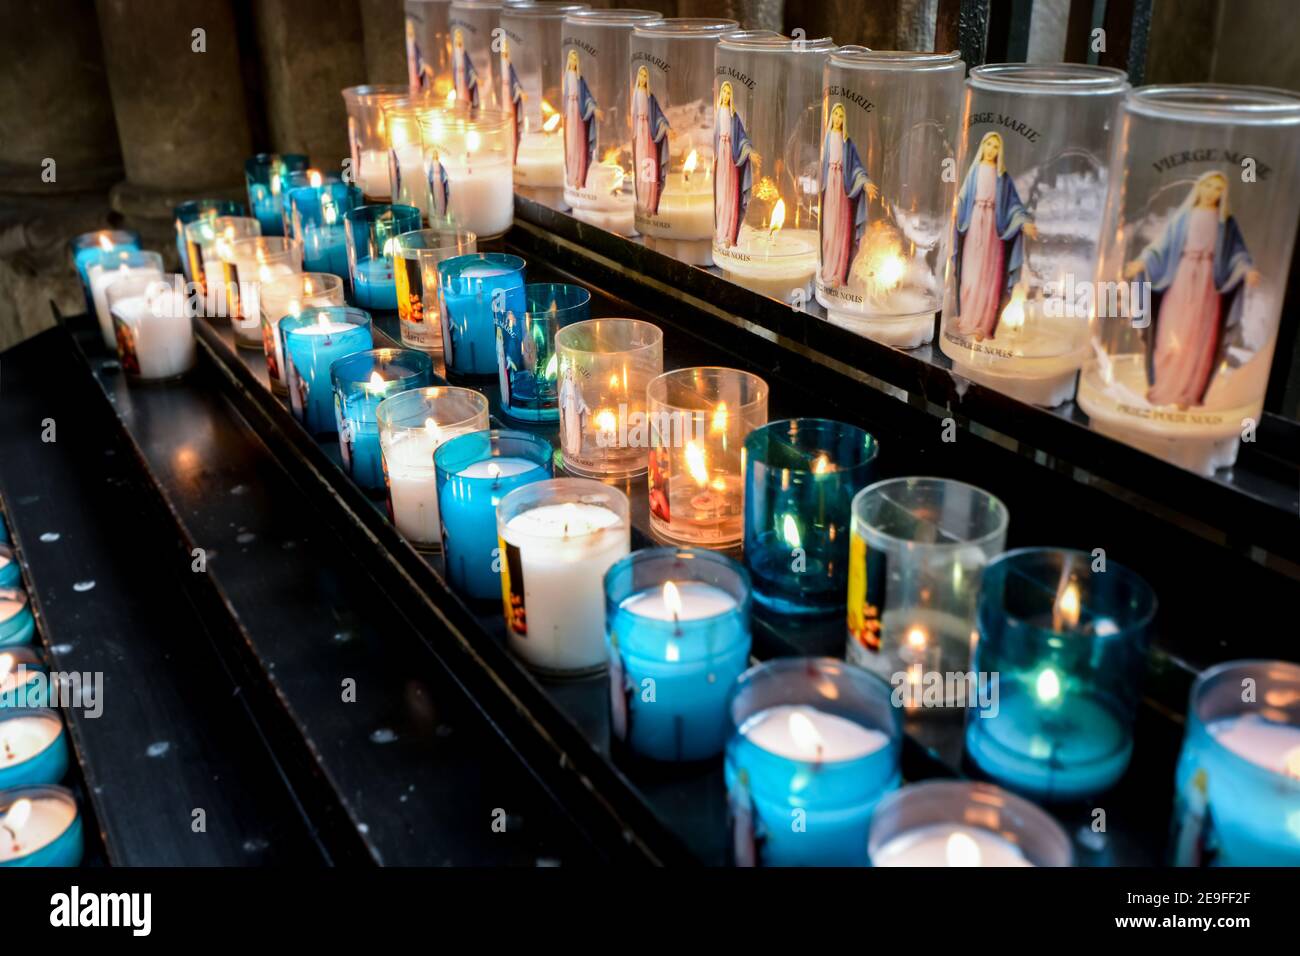 Prayer or votive candles with the image of vierge marie or the Virgin Mary  inside the Rouen Cathedral in Normandy, France Stock Photo